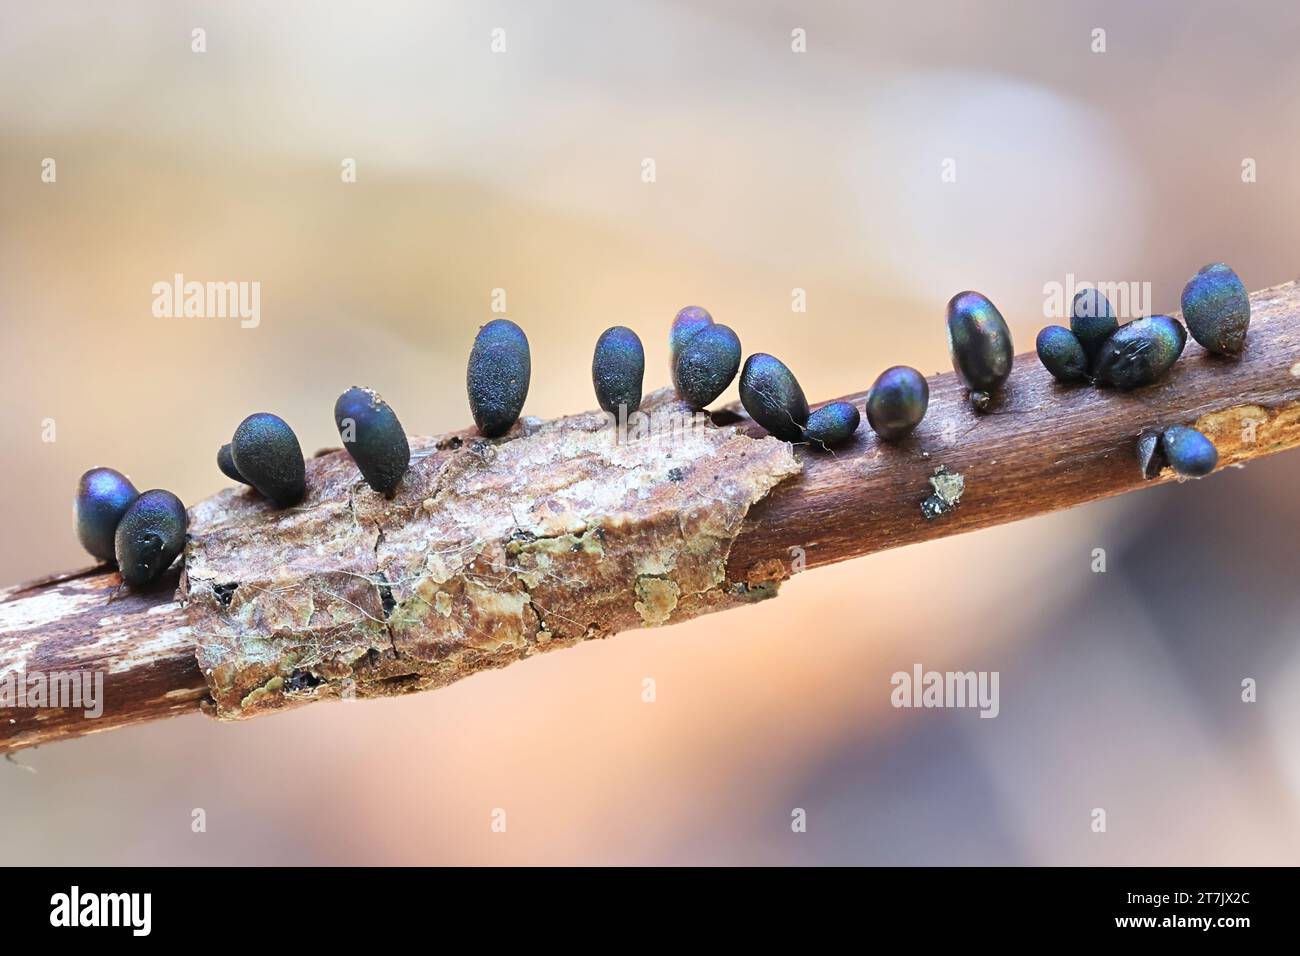 Lamproderma ovoideum, a nivicolous slime mold from Finland, no common English name Stock Photo